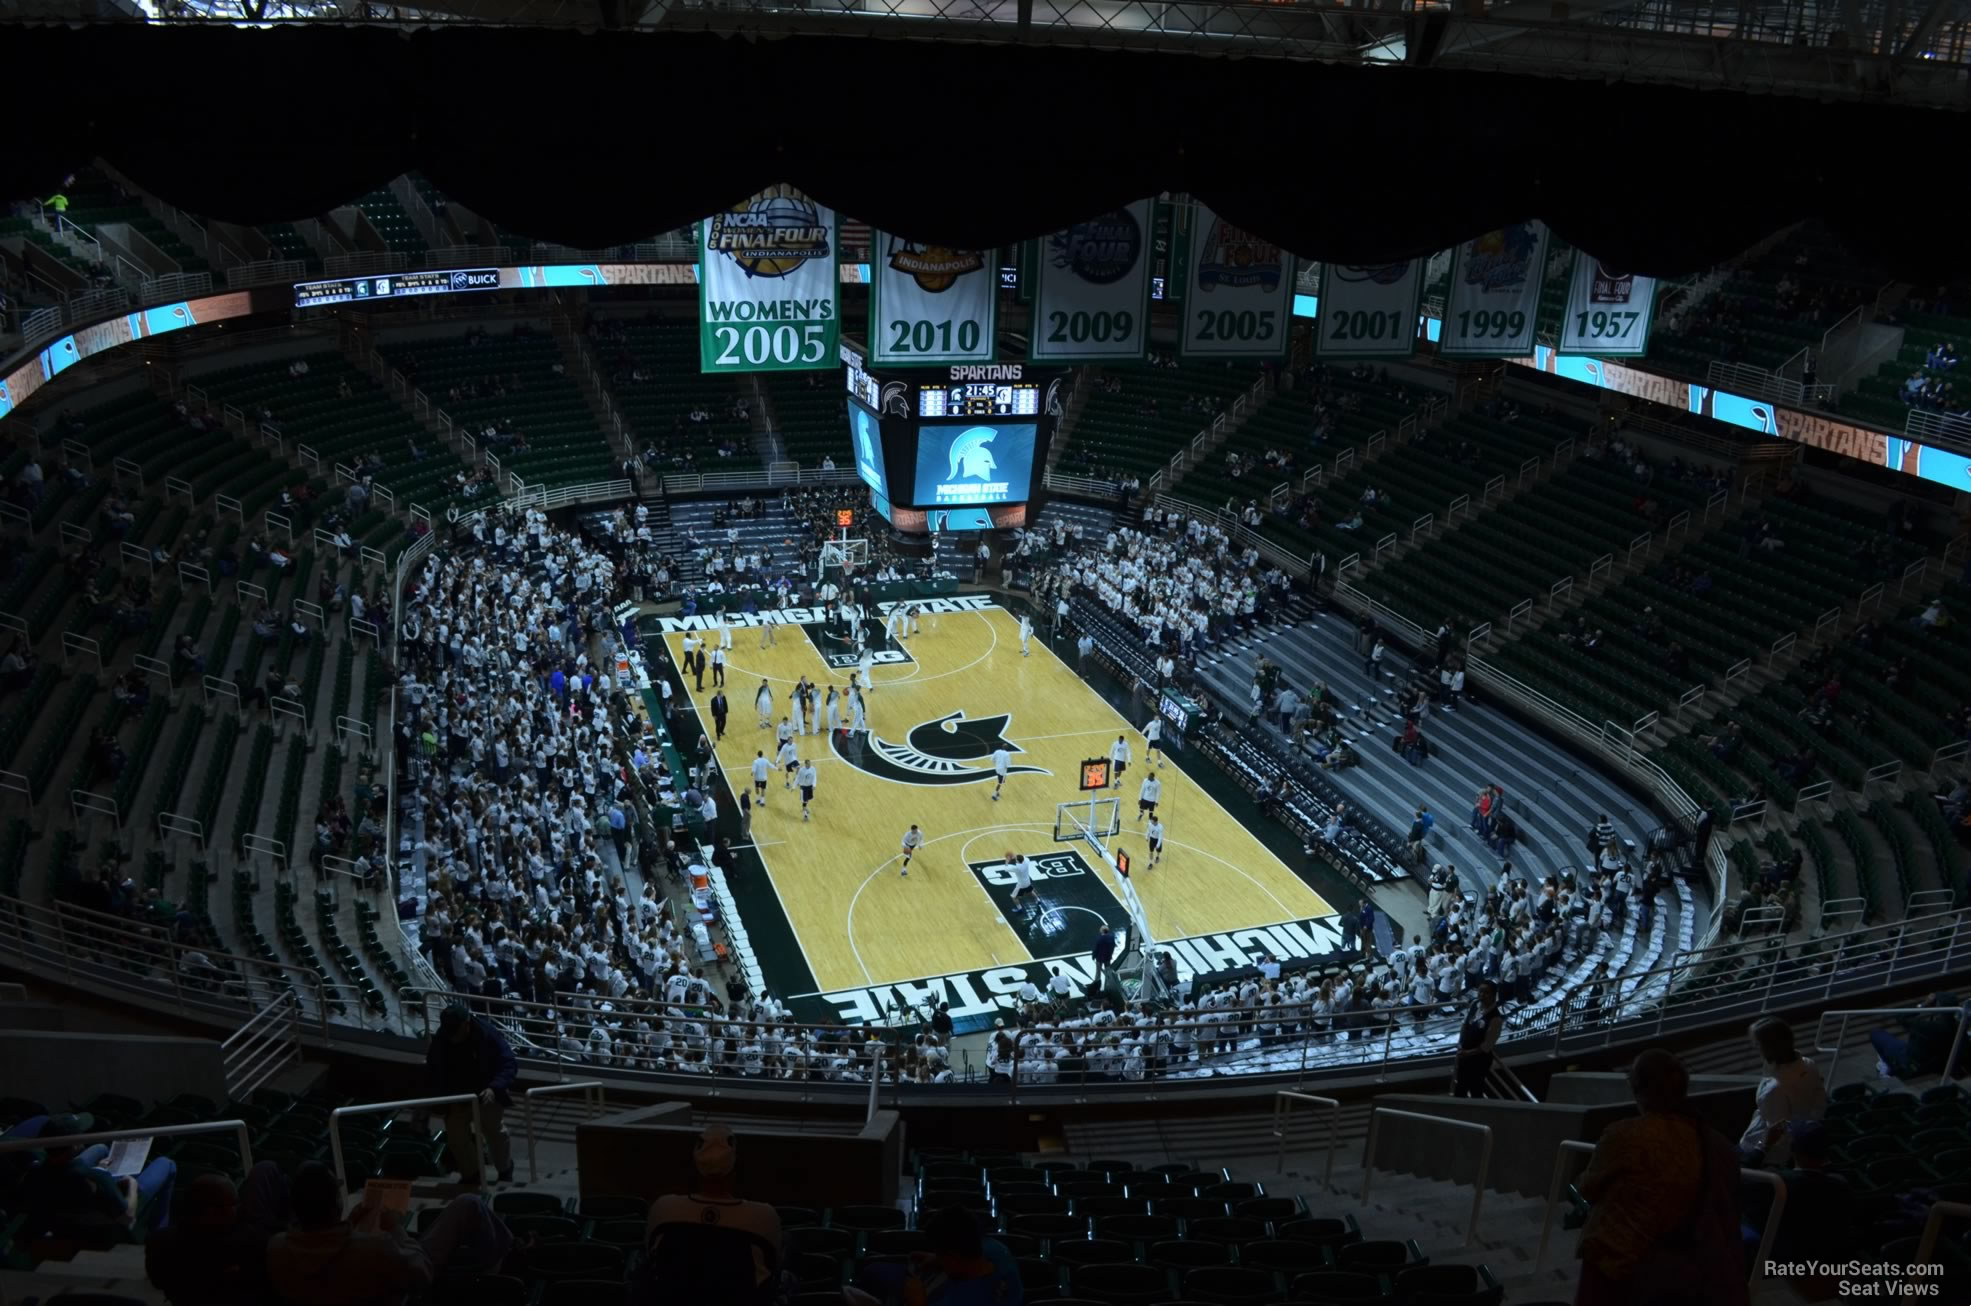 section 202, row 15 seat view  - breslin center